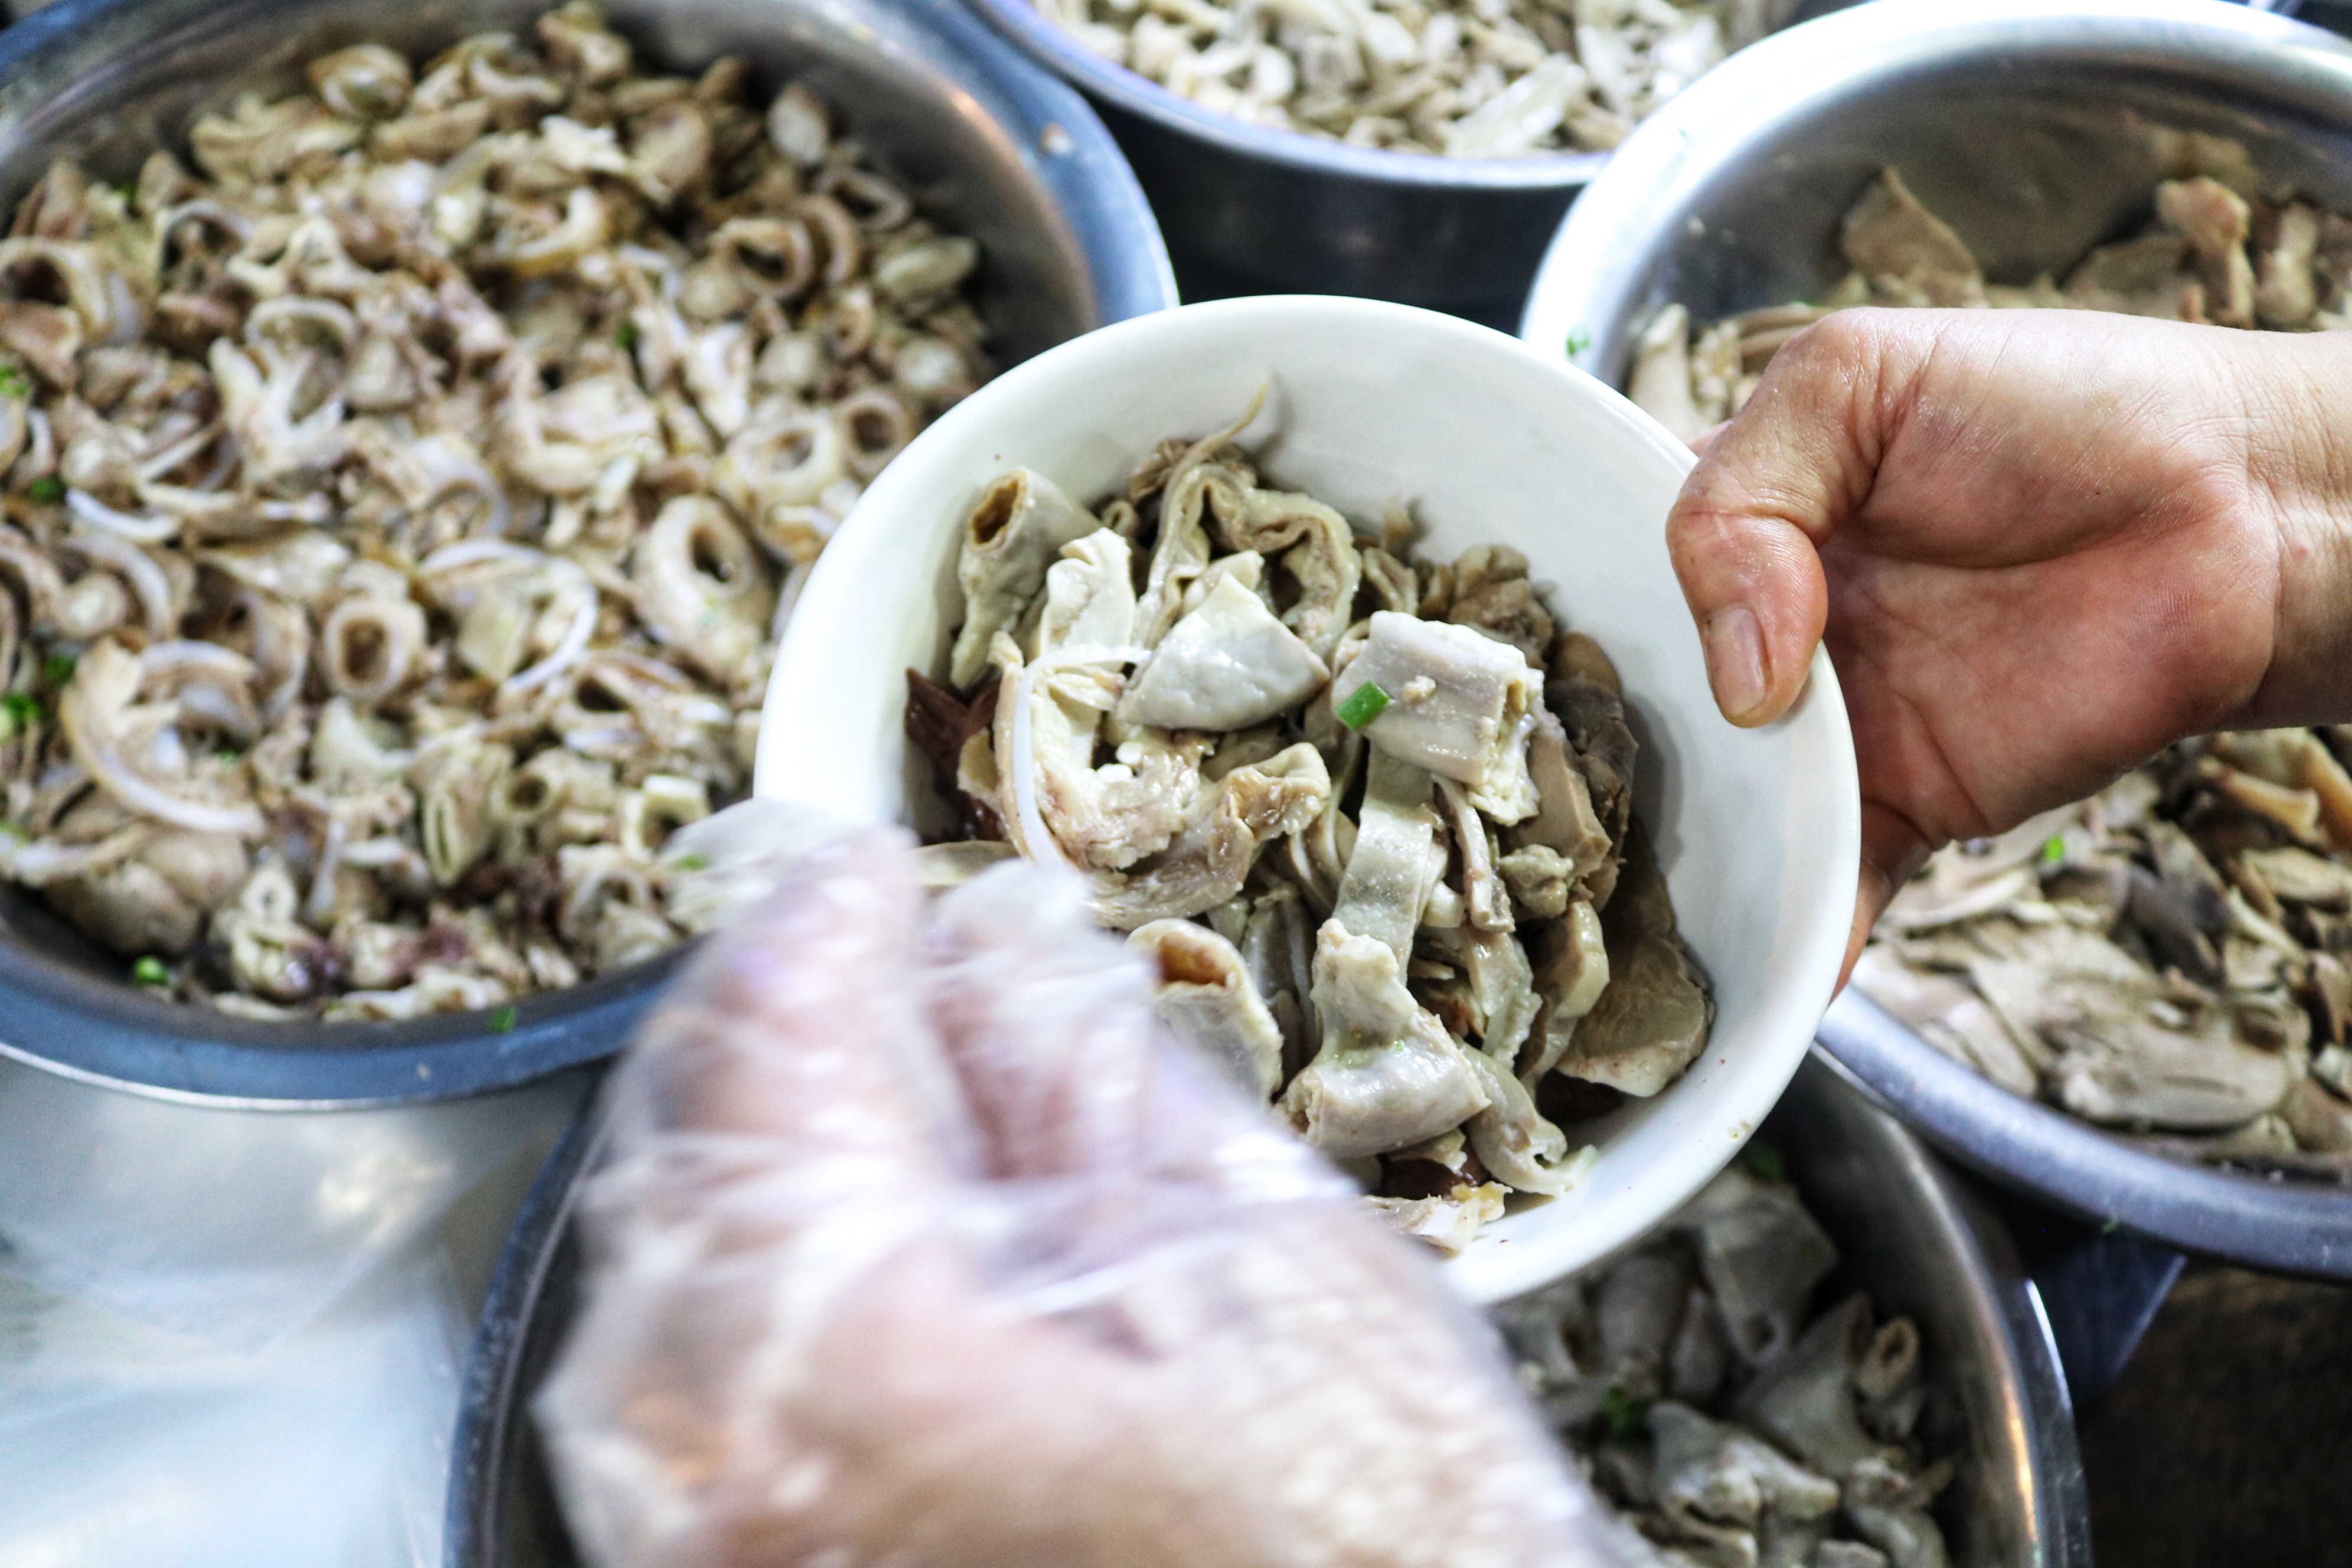 Cooked pig organs are put in a bowl to be served at Hoa’s stall on Pham Van Hai Street in Tan Binh District, Ho Chi Minh City. Photo: Hoang An / Tuoi Tre News